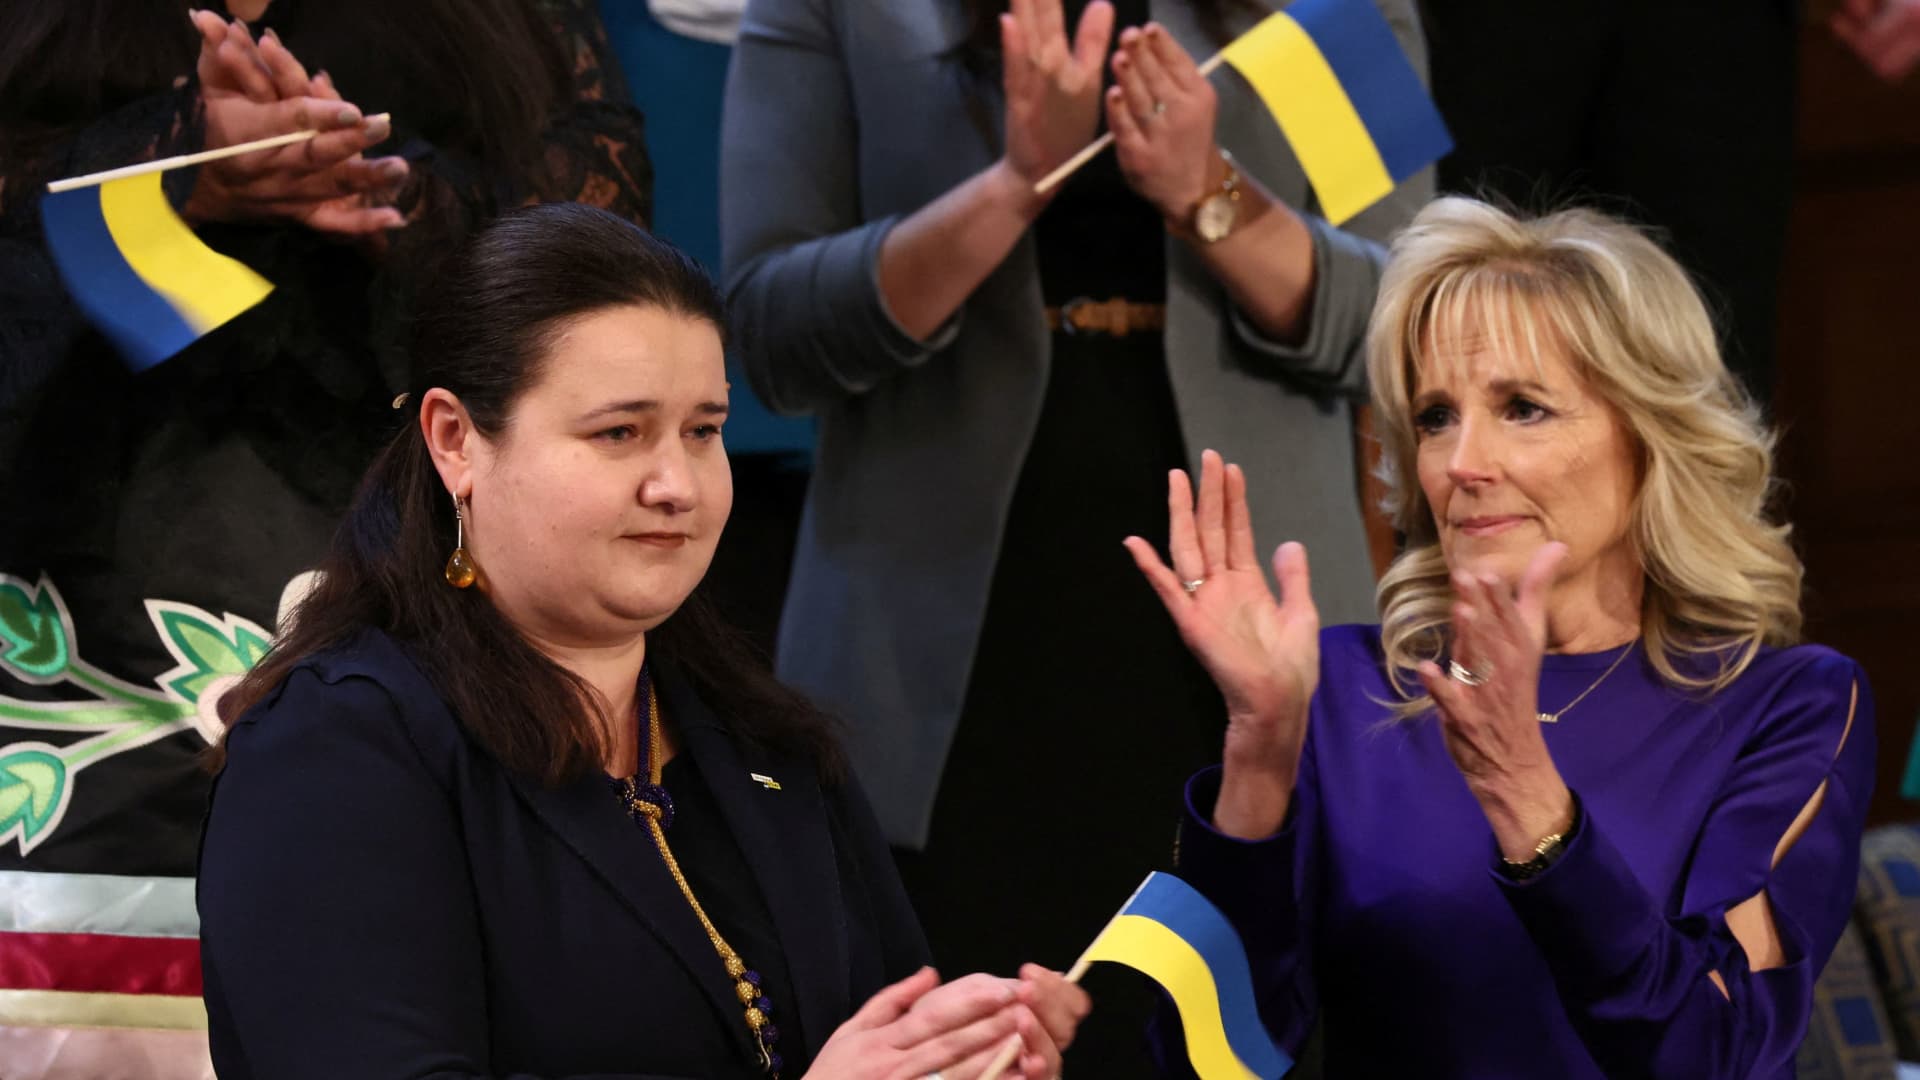 U.S. first lady Jill Biden applauds her guest Ukrainian Ambassador to the U.S. Oksana Markarova in the first lady's box as President Joe Biden welcomes Markarova during his State of the Union address to a joint session of the U.S. Congress in the House of Representatives Chamber at the Capitol in Washington, U.S. March 1, 2022.